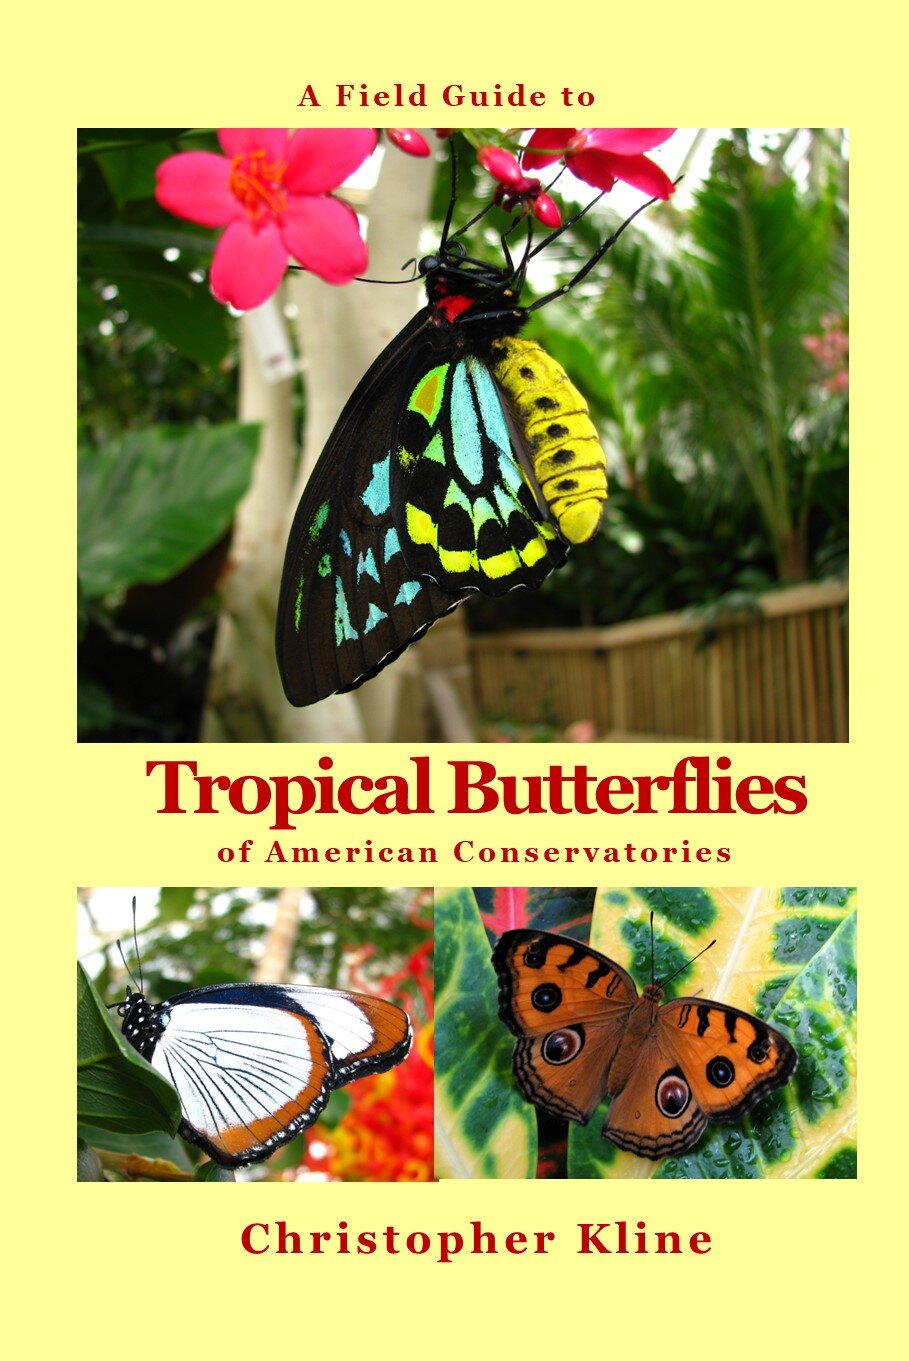 A Field Guide to Tropical Butterflies of American Conservatories —  Butterfly Ridge